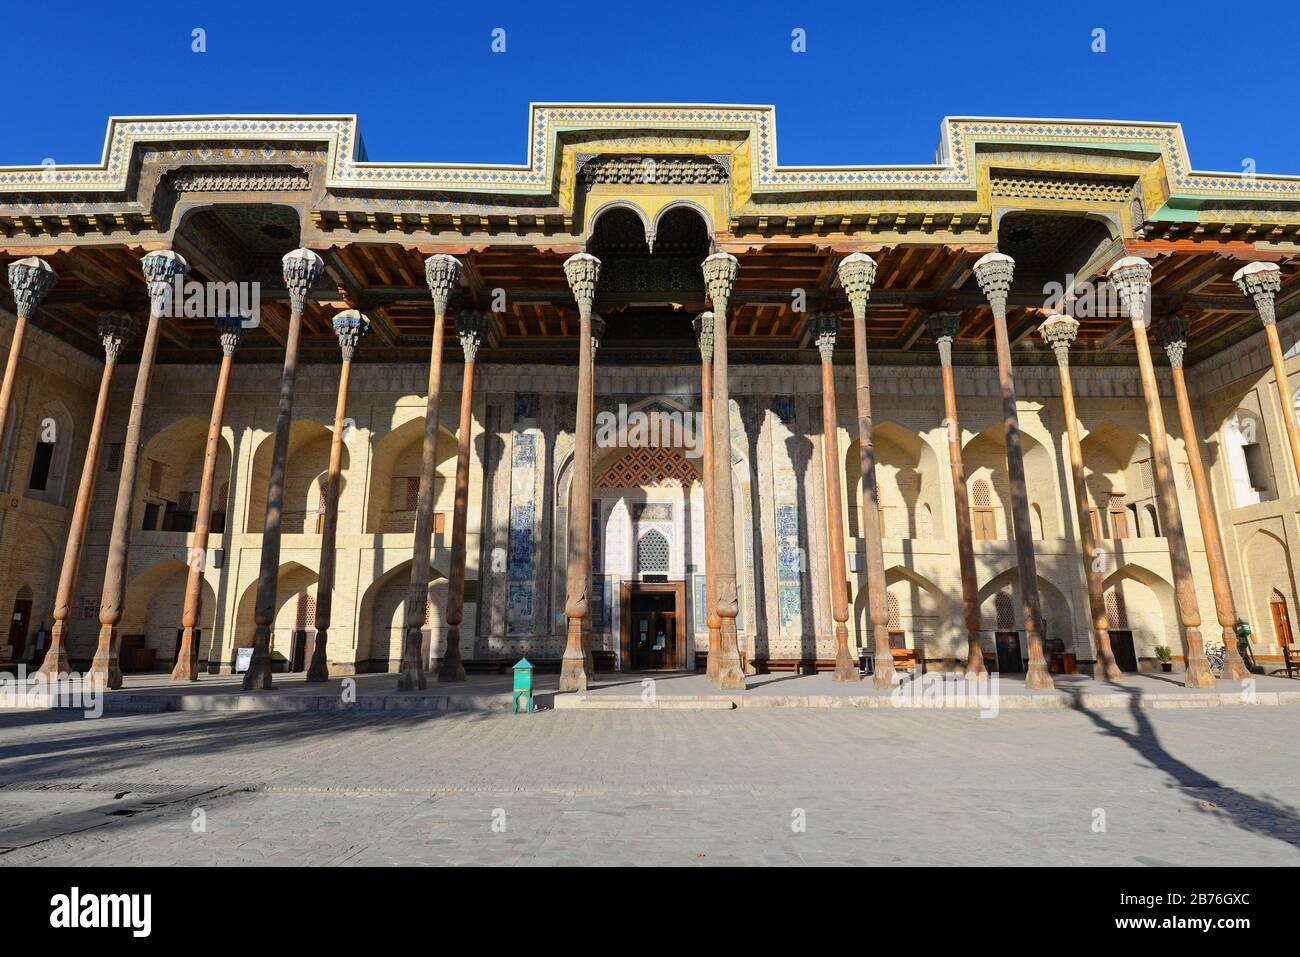 Frontal view of Bolo Haouz Mosque, a historical mosque located in Bukhara, Uzbekistan built with wooden columns, bricks and ornamented with mosaics. Stock Photo